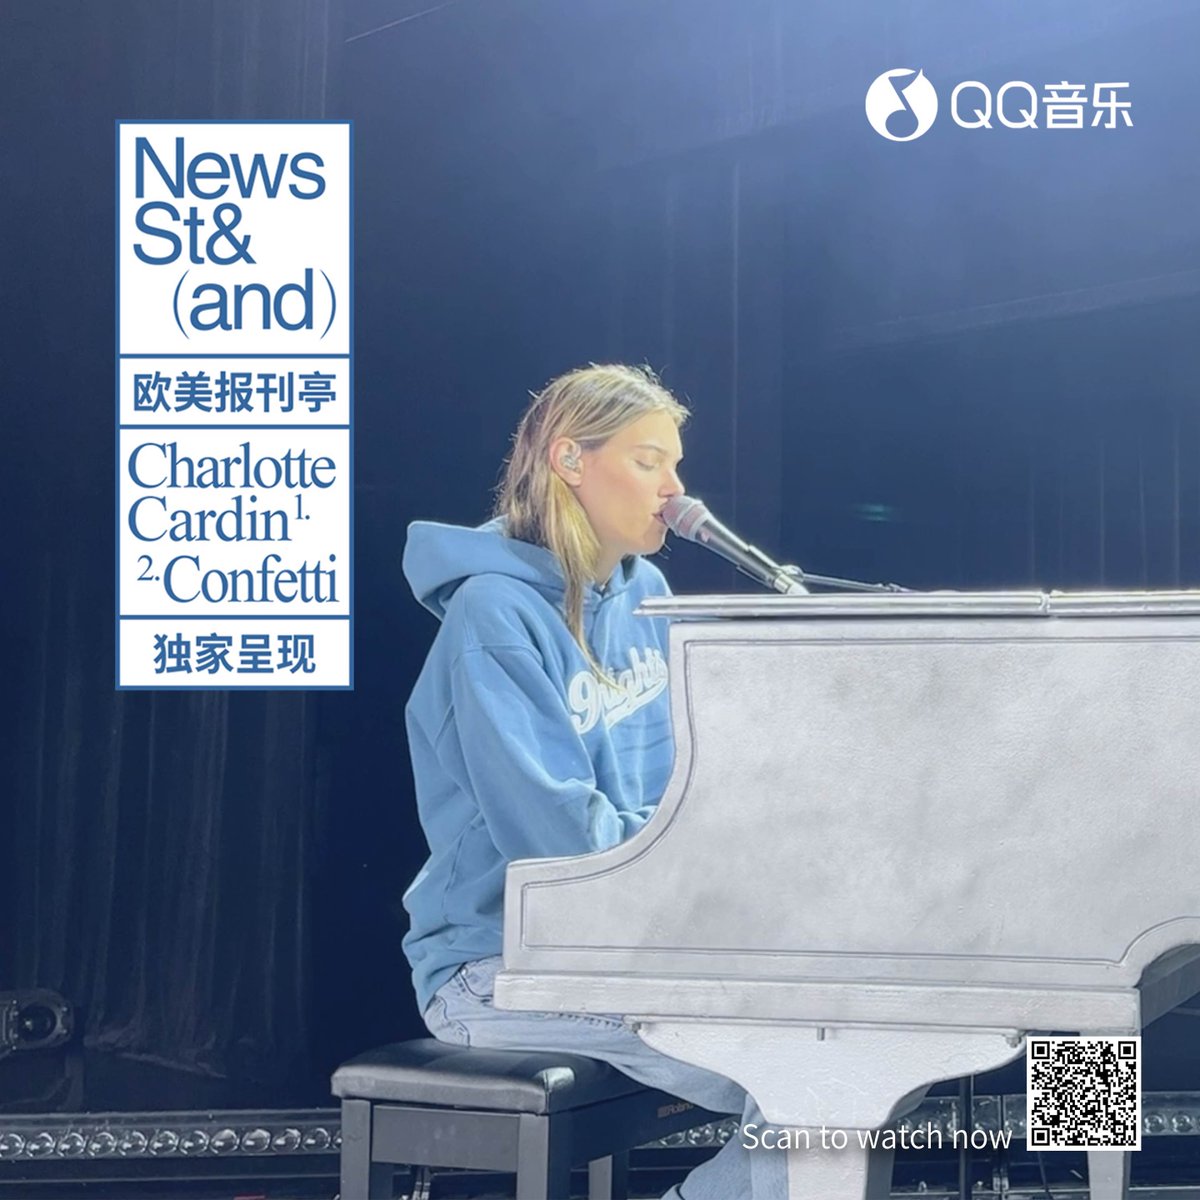 Thanks for having me on QQ Music’s Western Newsstand @MusicNewsstand 💙